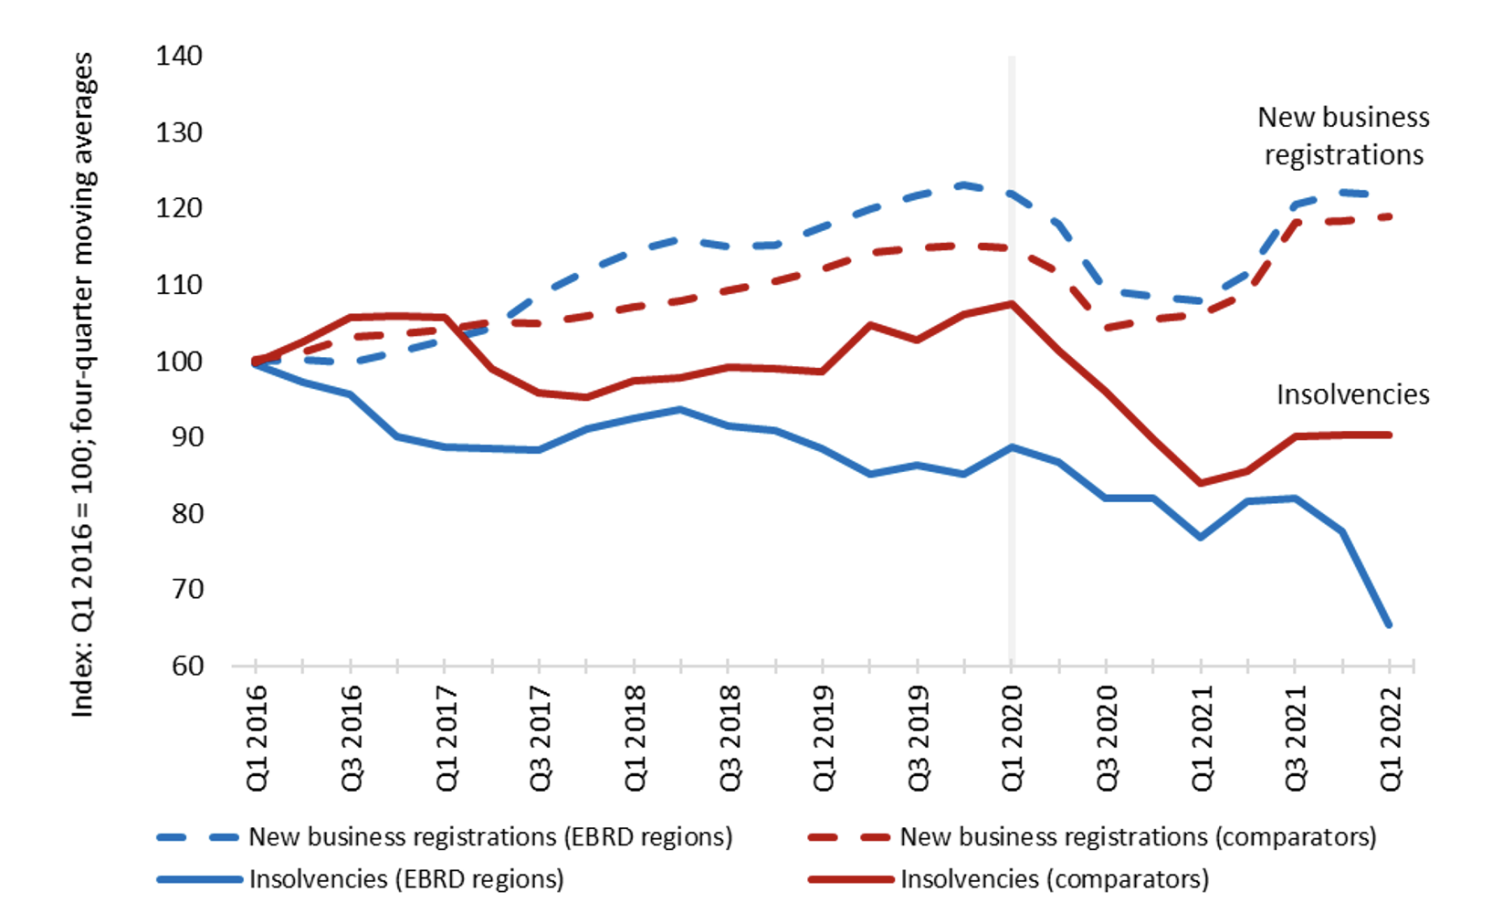 Figure 1 While new business registrations have recovered, firm exit rates remain subdued